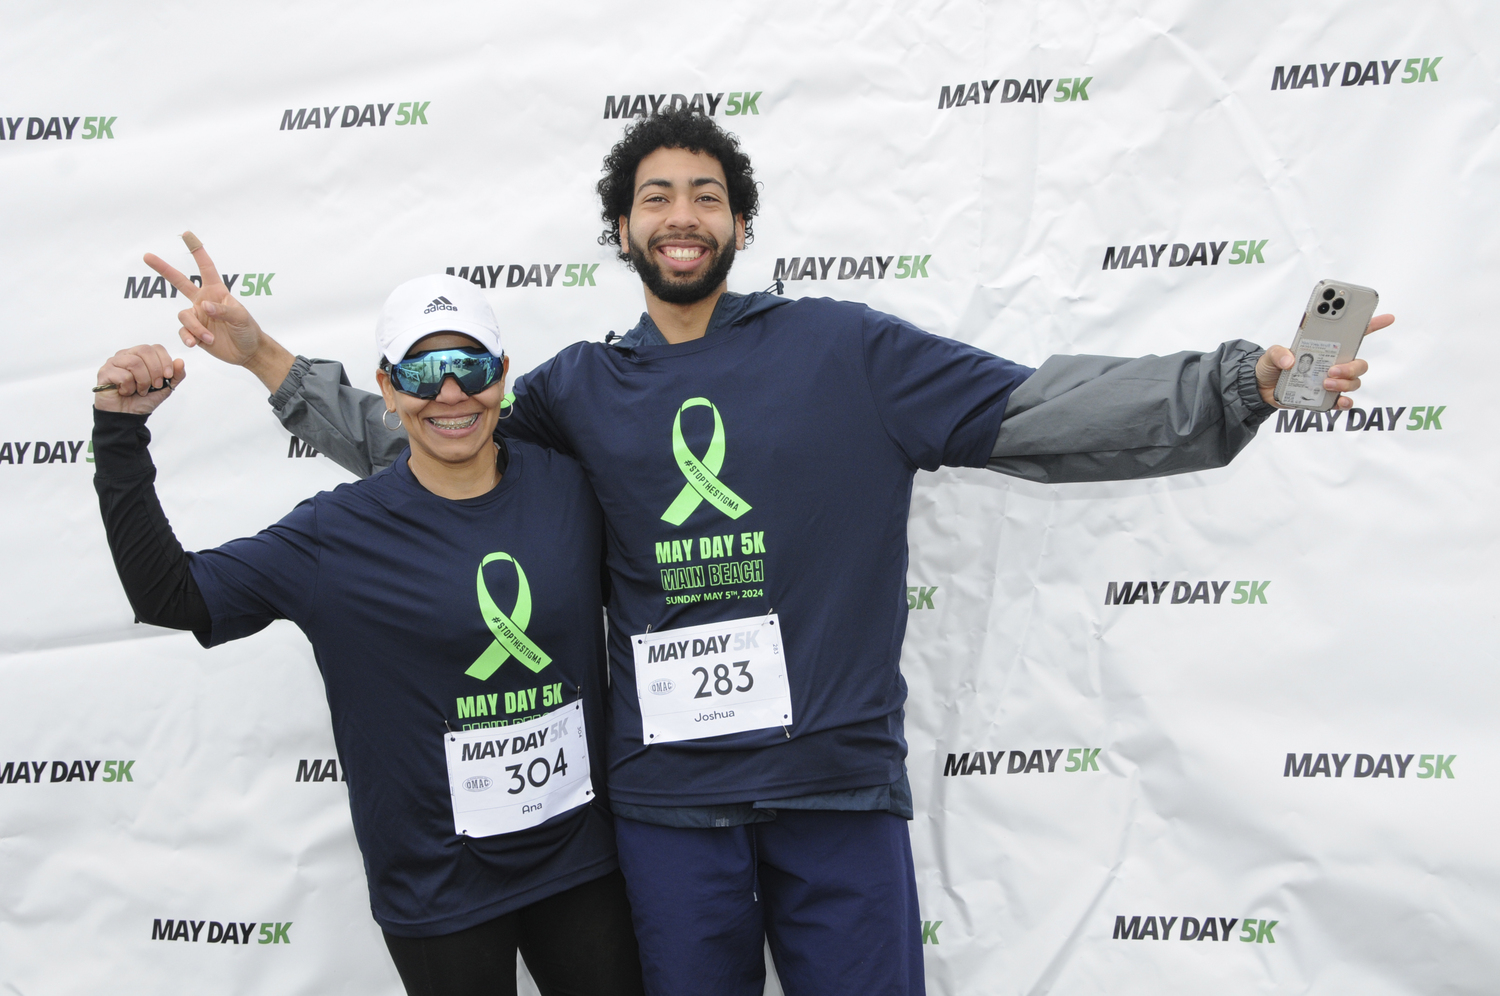 Ana Julia Garcia and Joshua Vargas at East Hampton's Main Beach early on Sunday morning, to prepare for the start of the annual May Day 5K Run, this year benefiting The Tyler Project (tylerproject.org). Over 900 people signed up for the Run, founded in 2021 by East Hampton High School runners Ryleigh O'Donnell and Dylan Cashin, to coincide with Mental Health Awareness Month. East Hampton Village Mayor Jerry Larsen, Village Administrator Marcos Baladron, Jennifer Fowkes of the Old Montauk Athletic Club and Bradford Billet of the East Hampton Village Foundation provided support for the Run.  RICHARD LEWIN